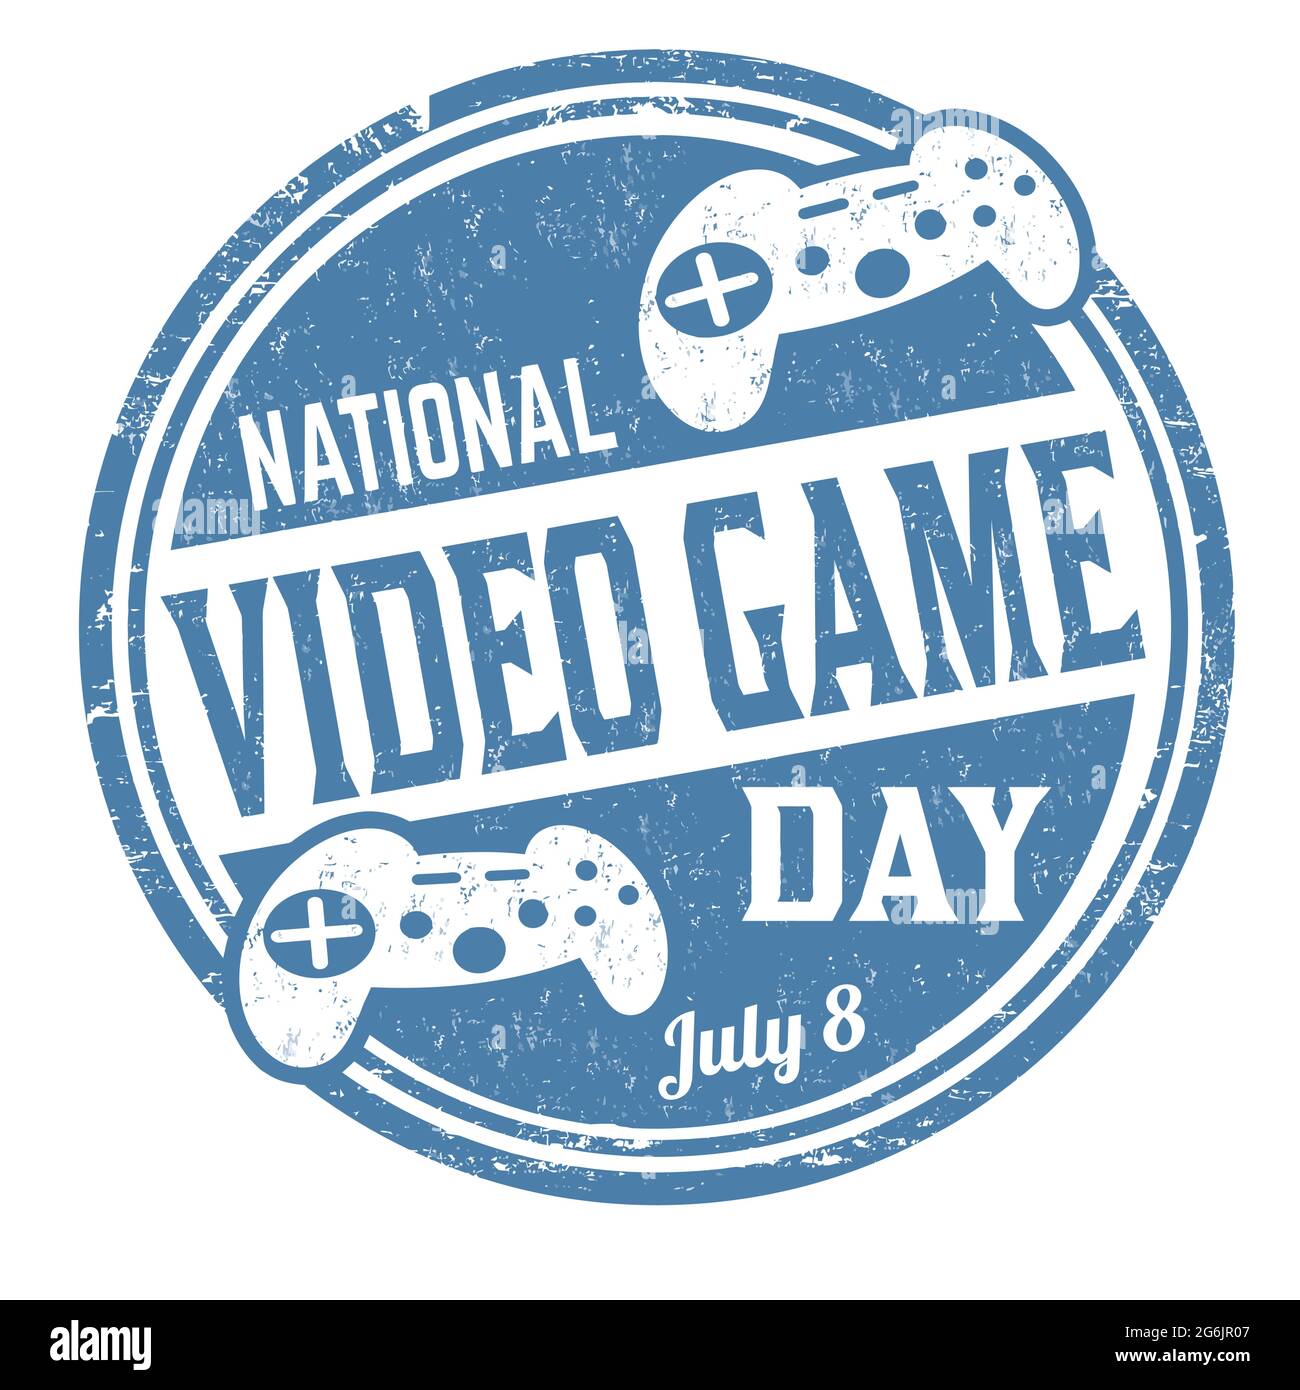 National video game day grunge rubber stamp on white background, vector